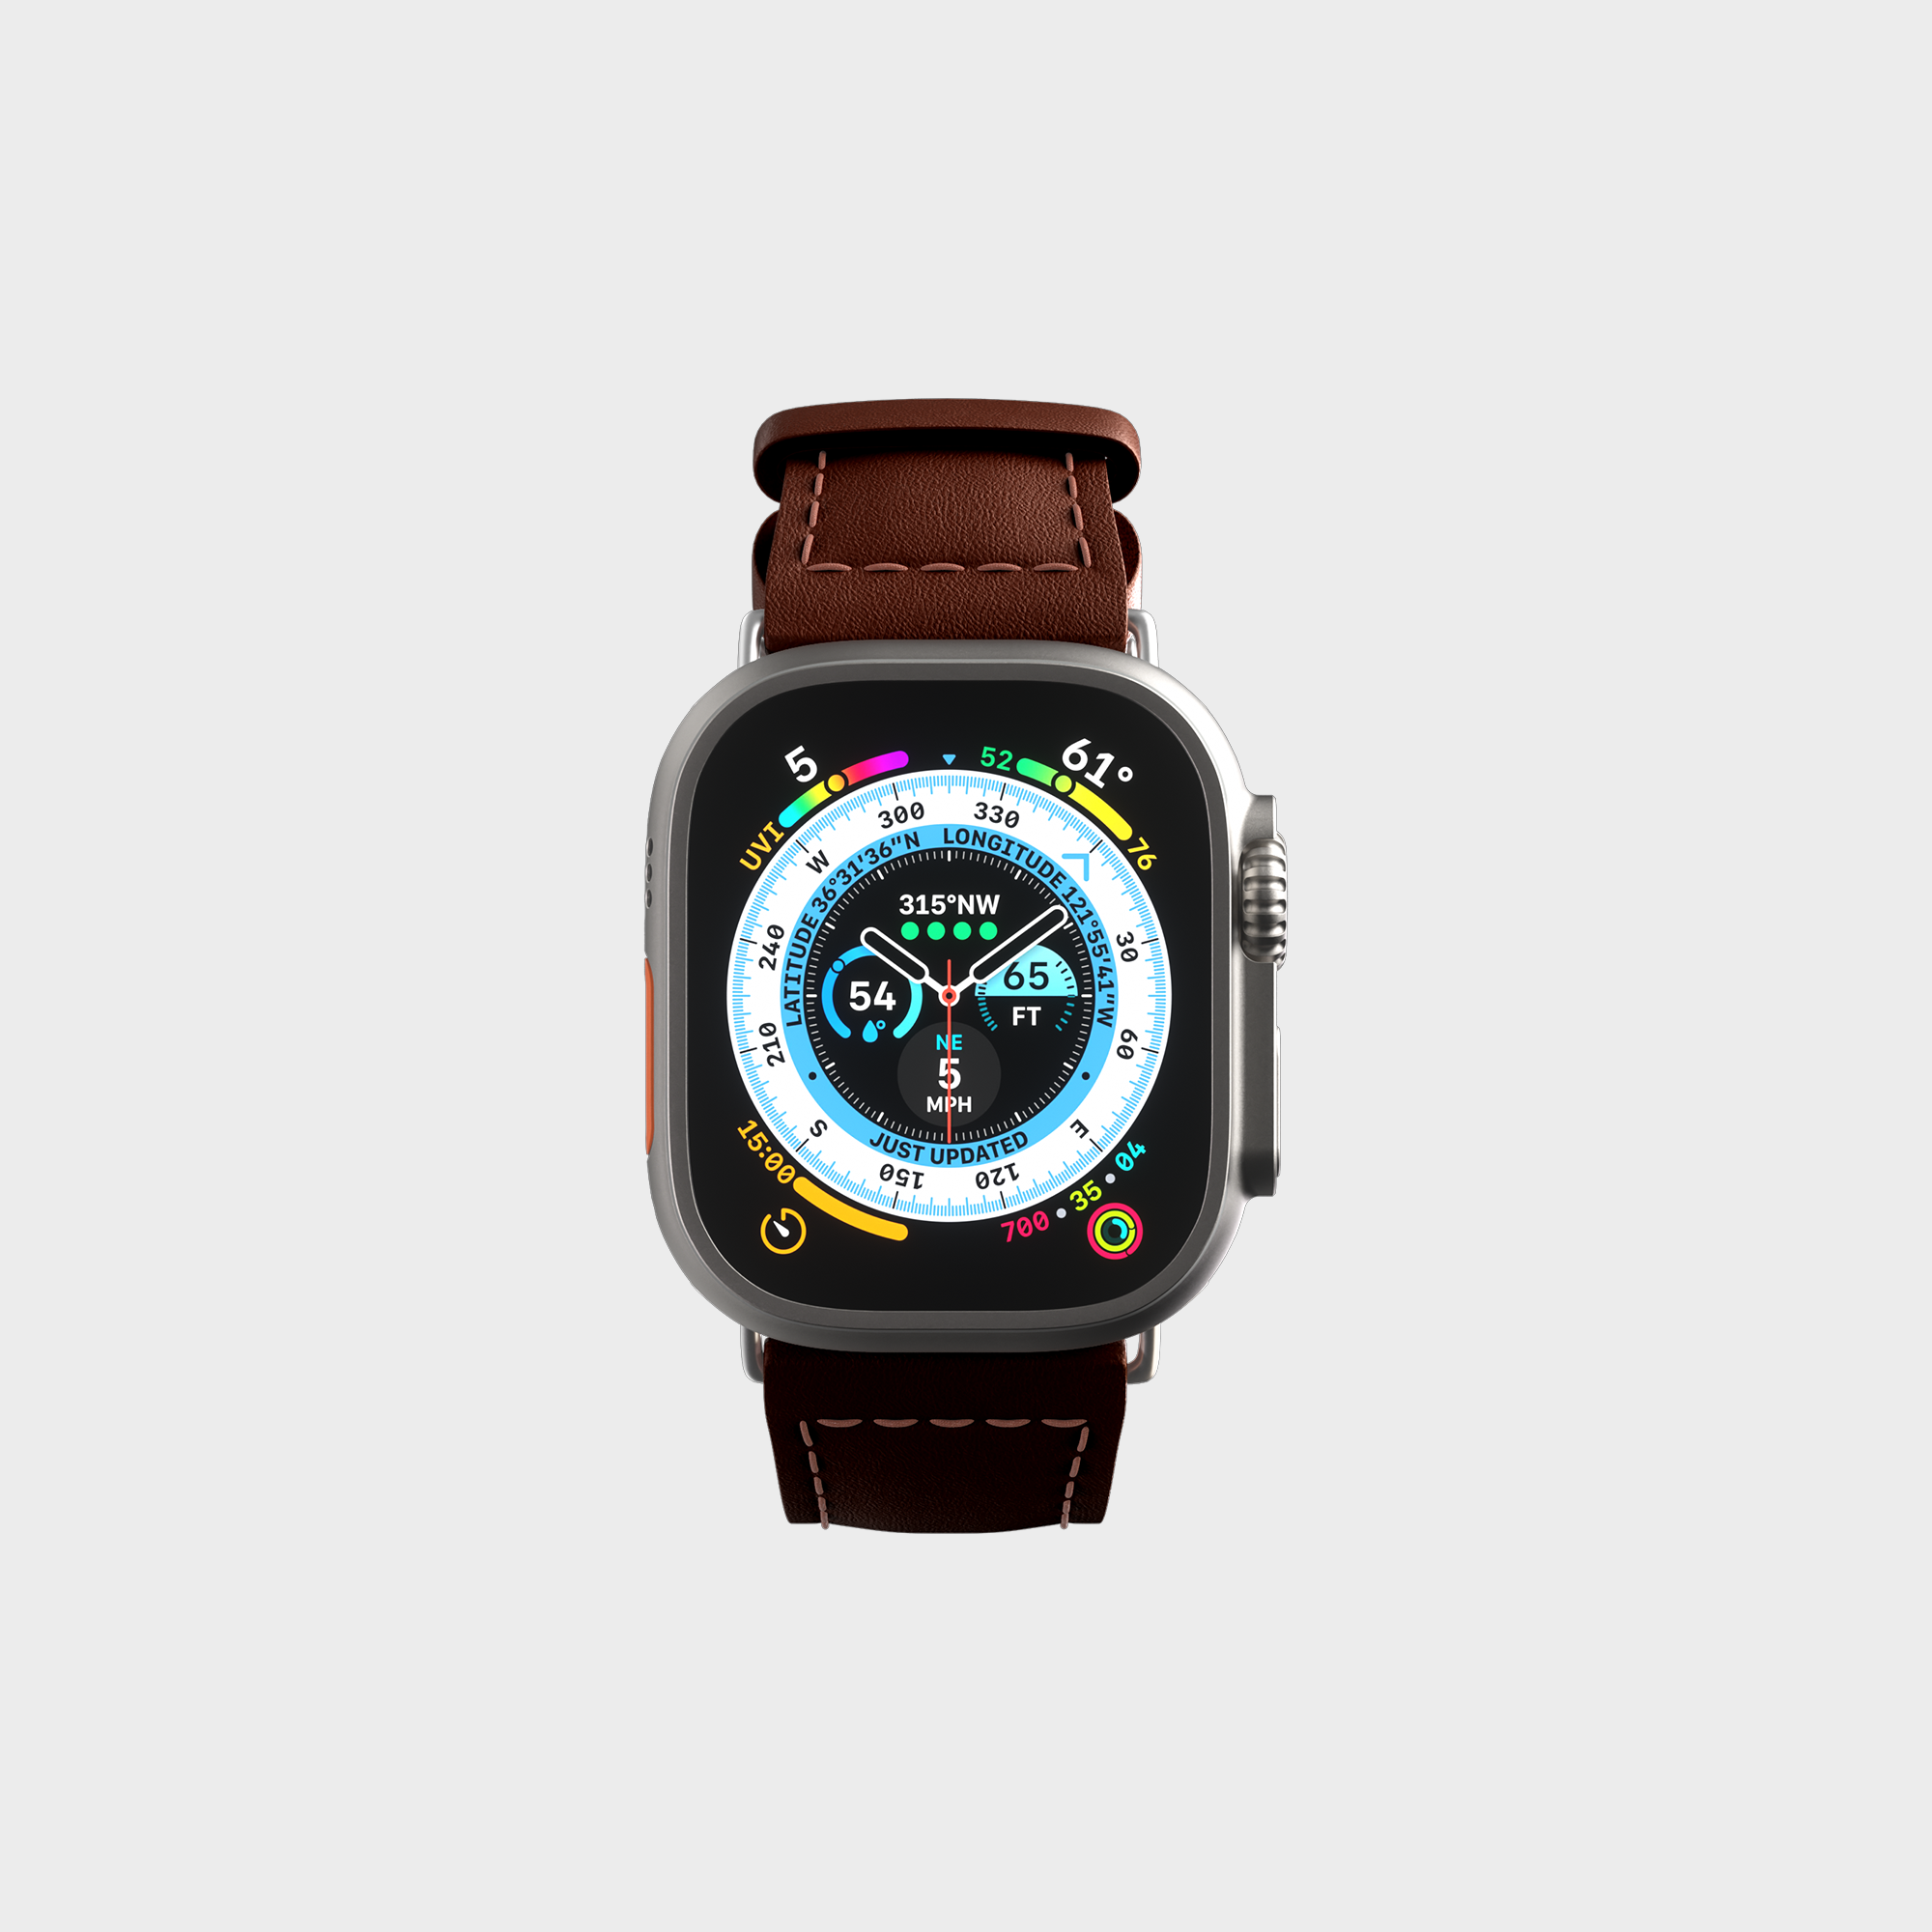 "Smartwatch with fitness tracking display and brown leather strap isolated on white background."